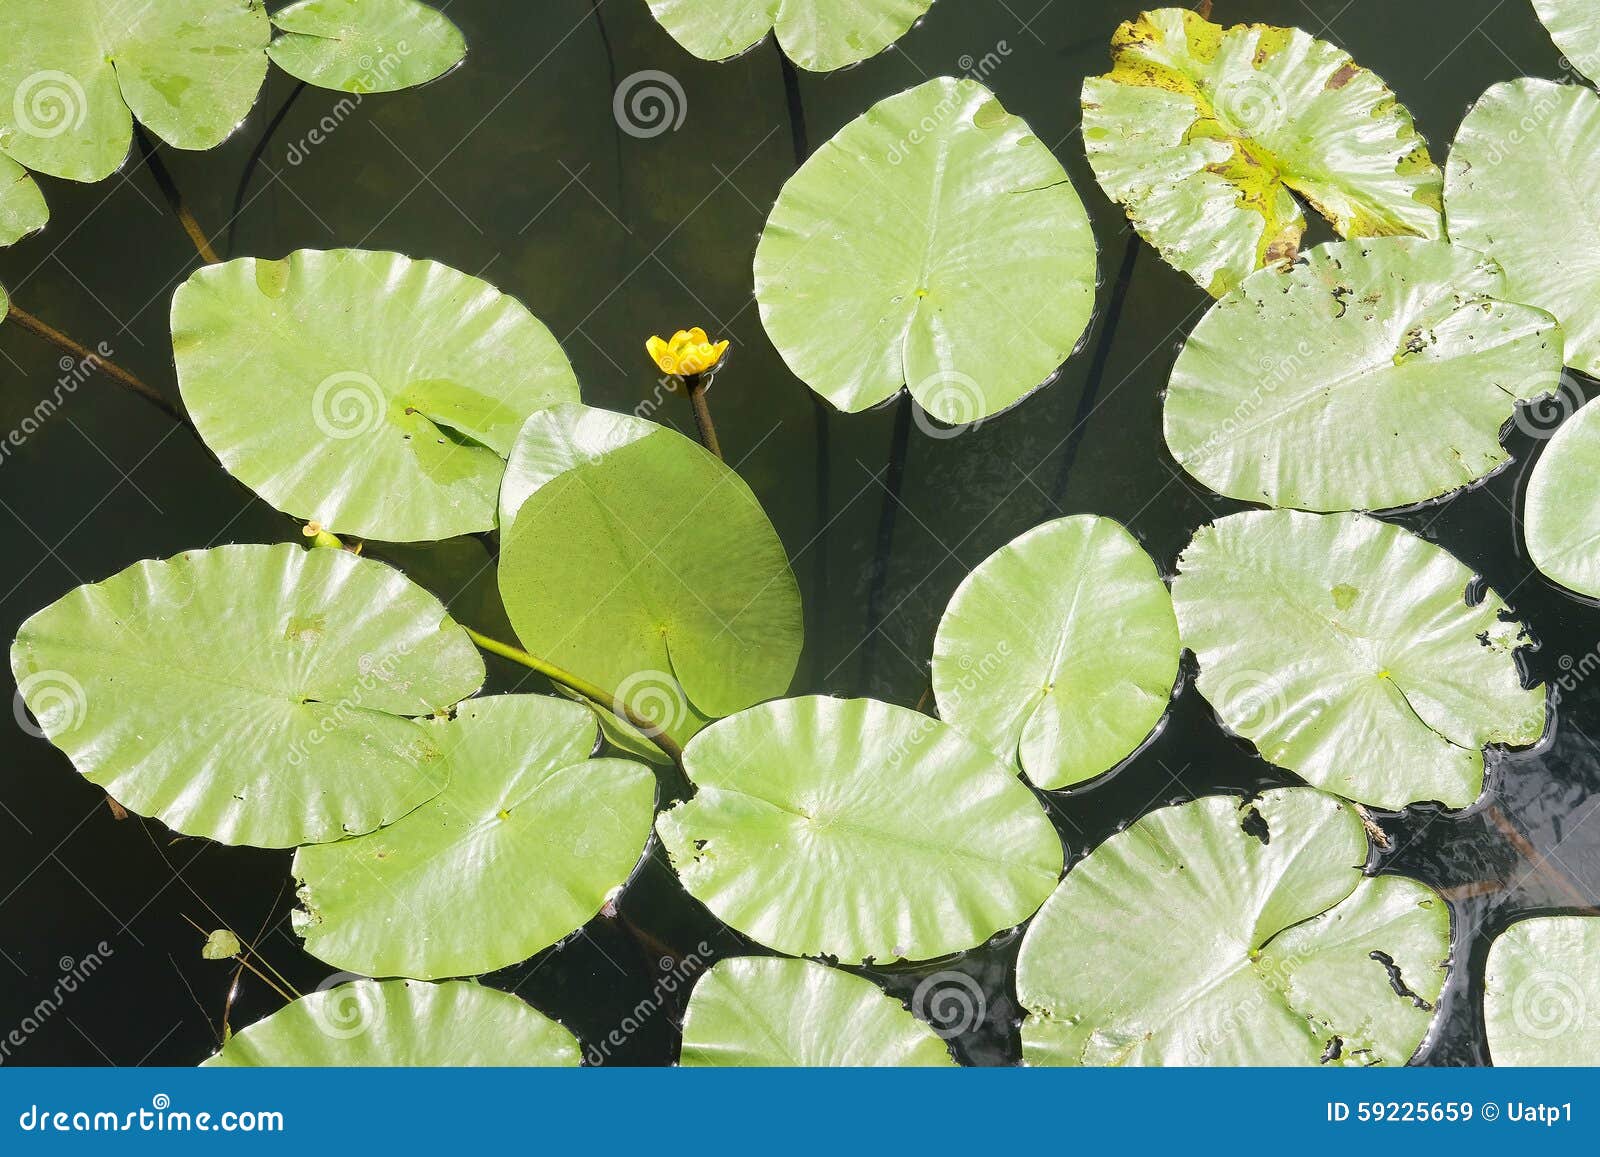 Grass and water lilies stock image. Image of lilies, grass - 59225659